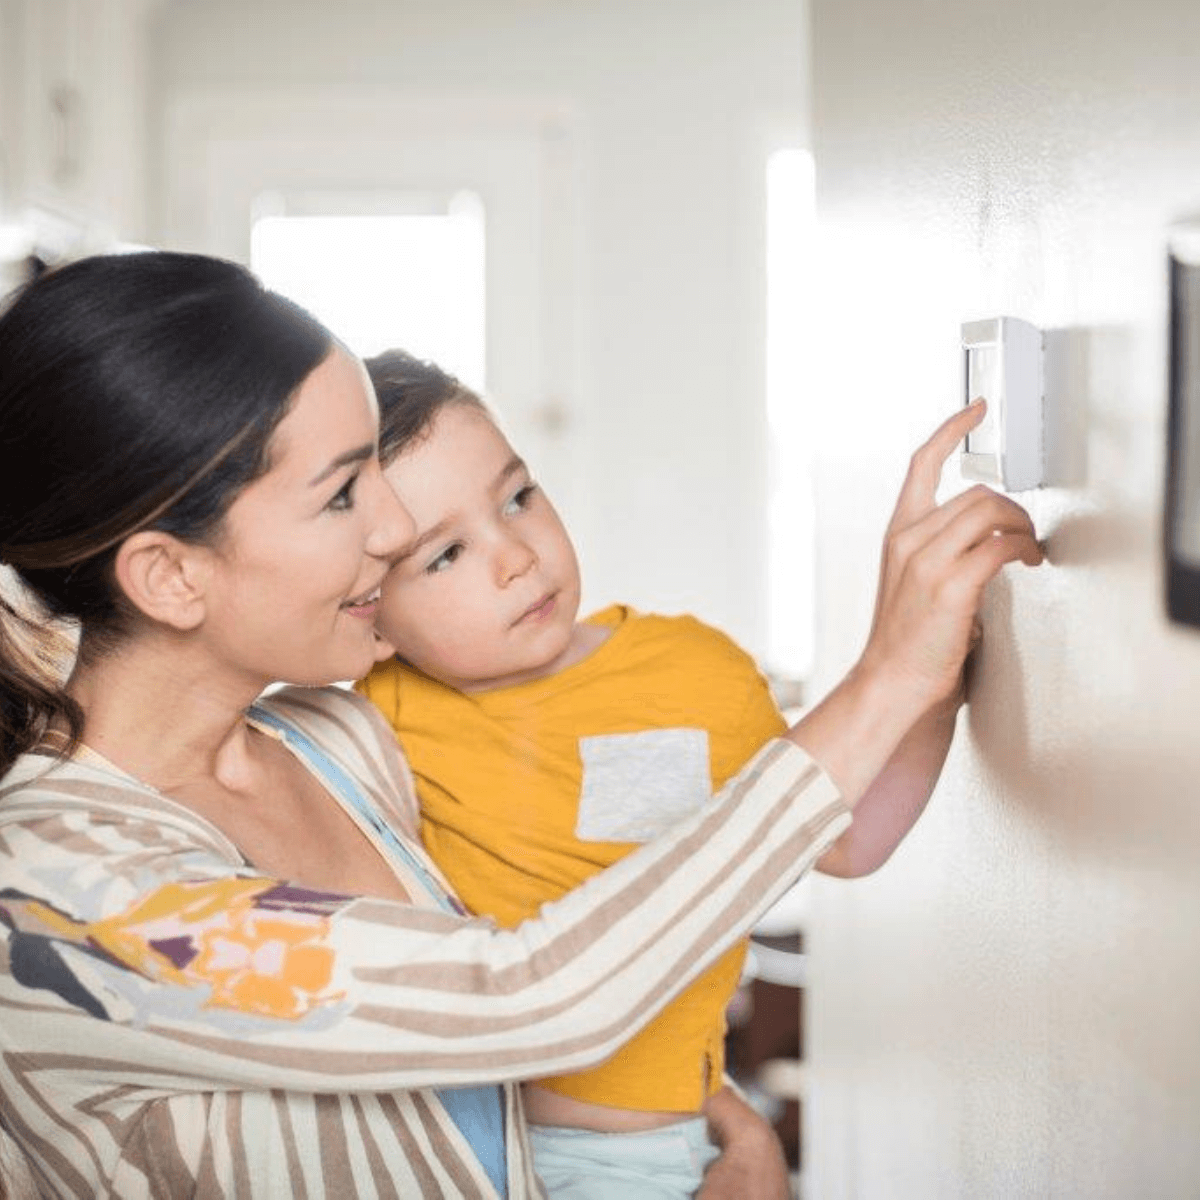 Troubleshoot common AC problems like checking your thermostat